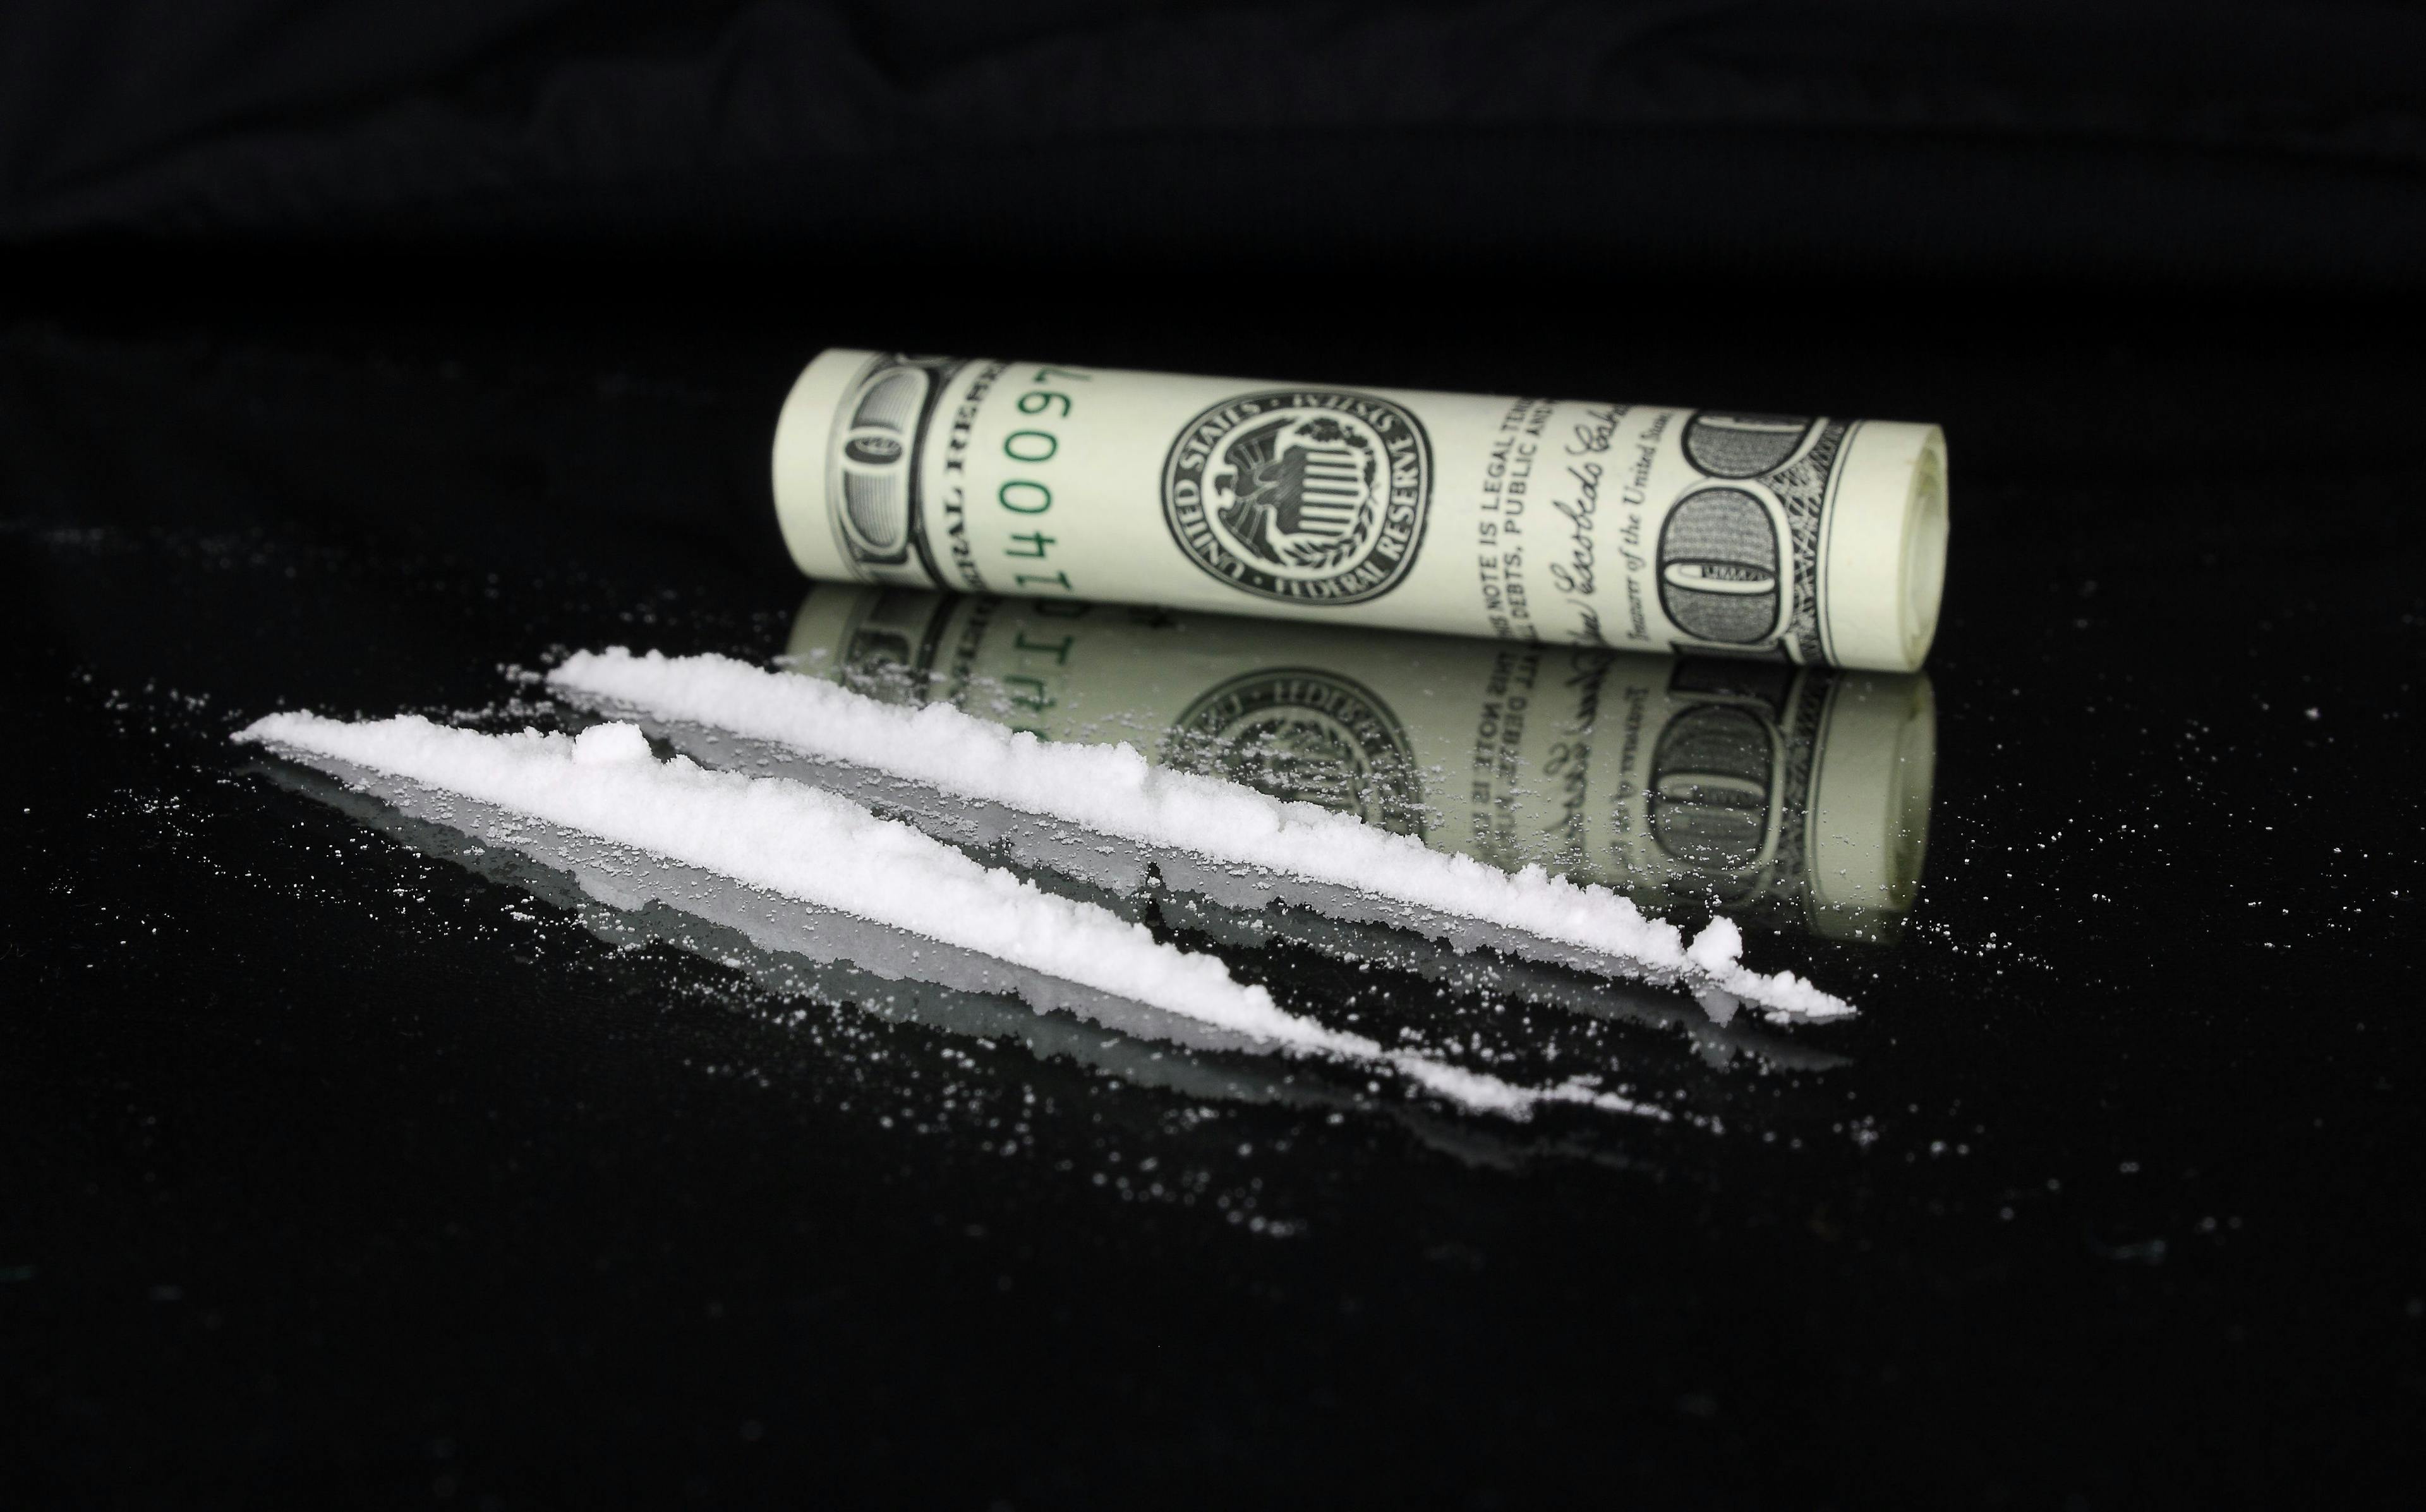 two lines of cocaine next to a rolled-up $100 bill